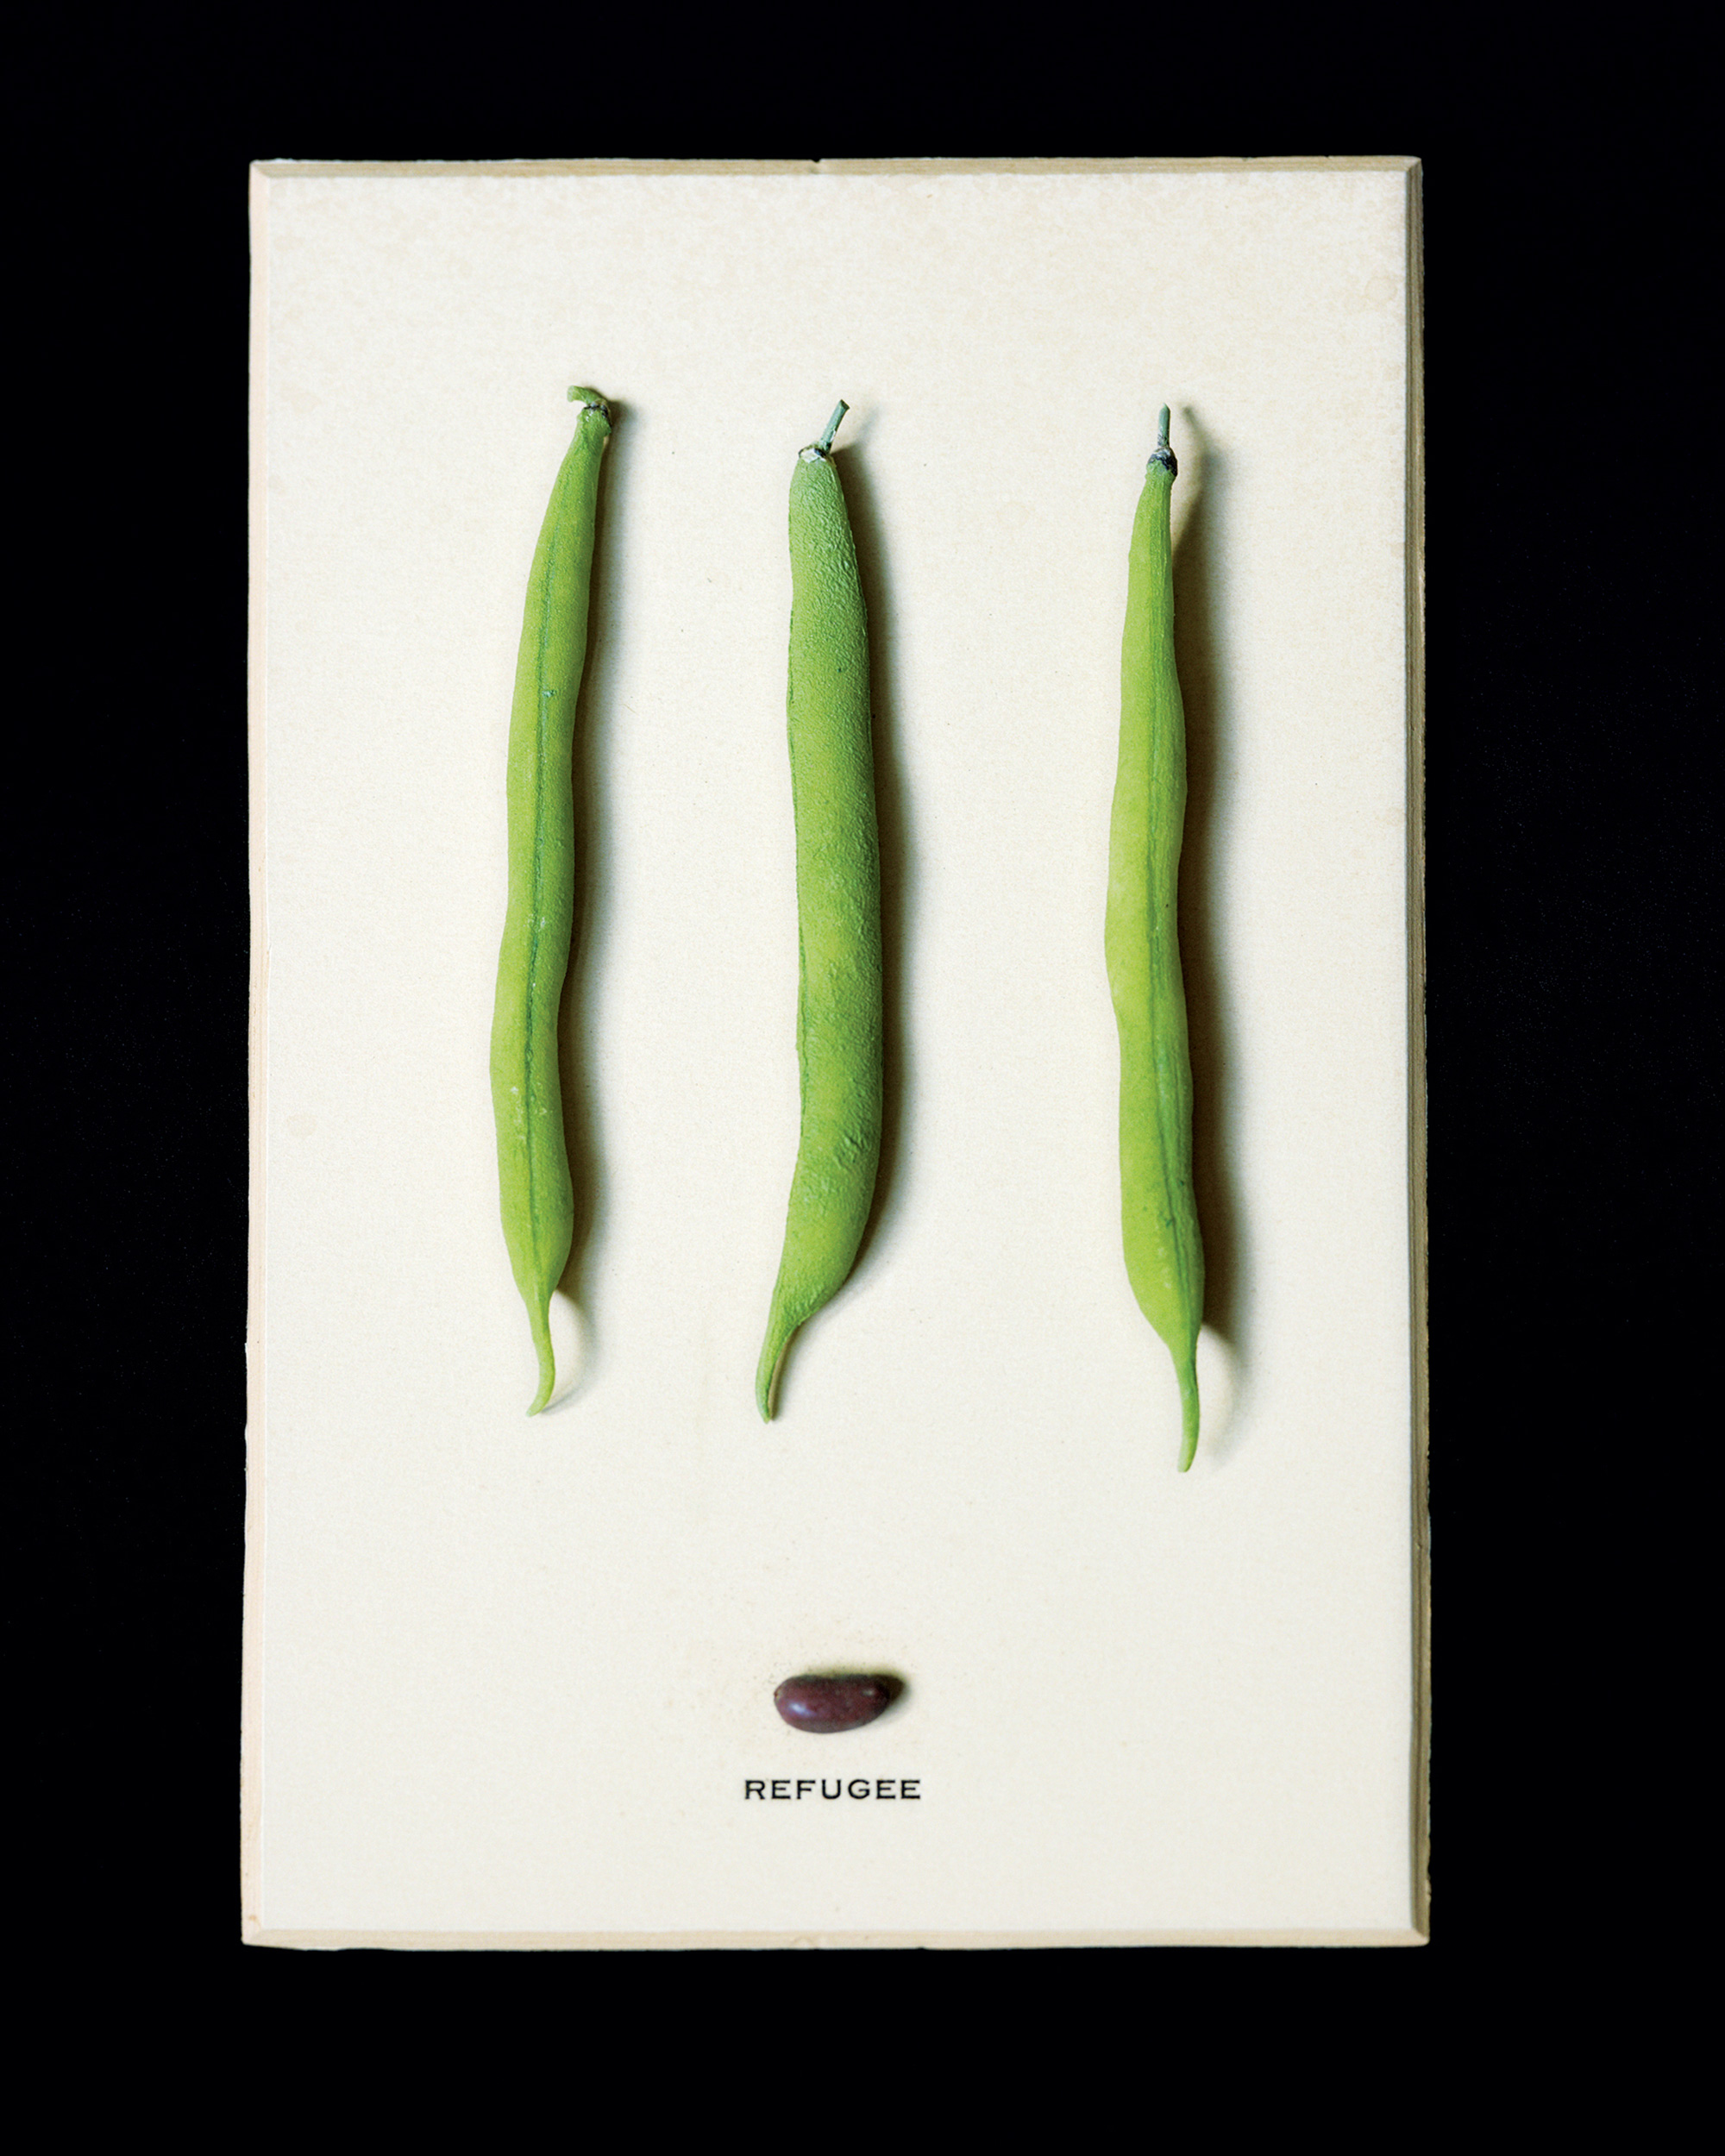 A two thousand and nine wax agricultural model of string beans titled “Refugee.”